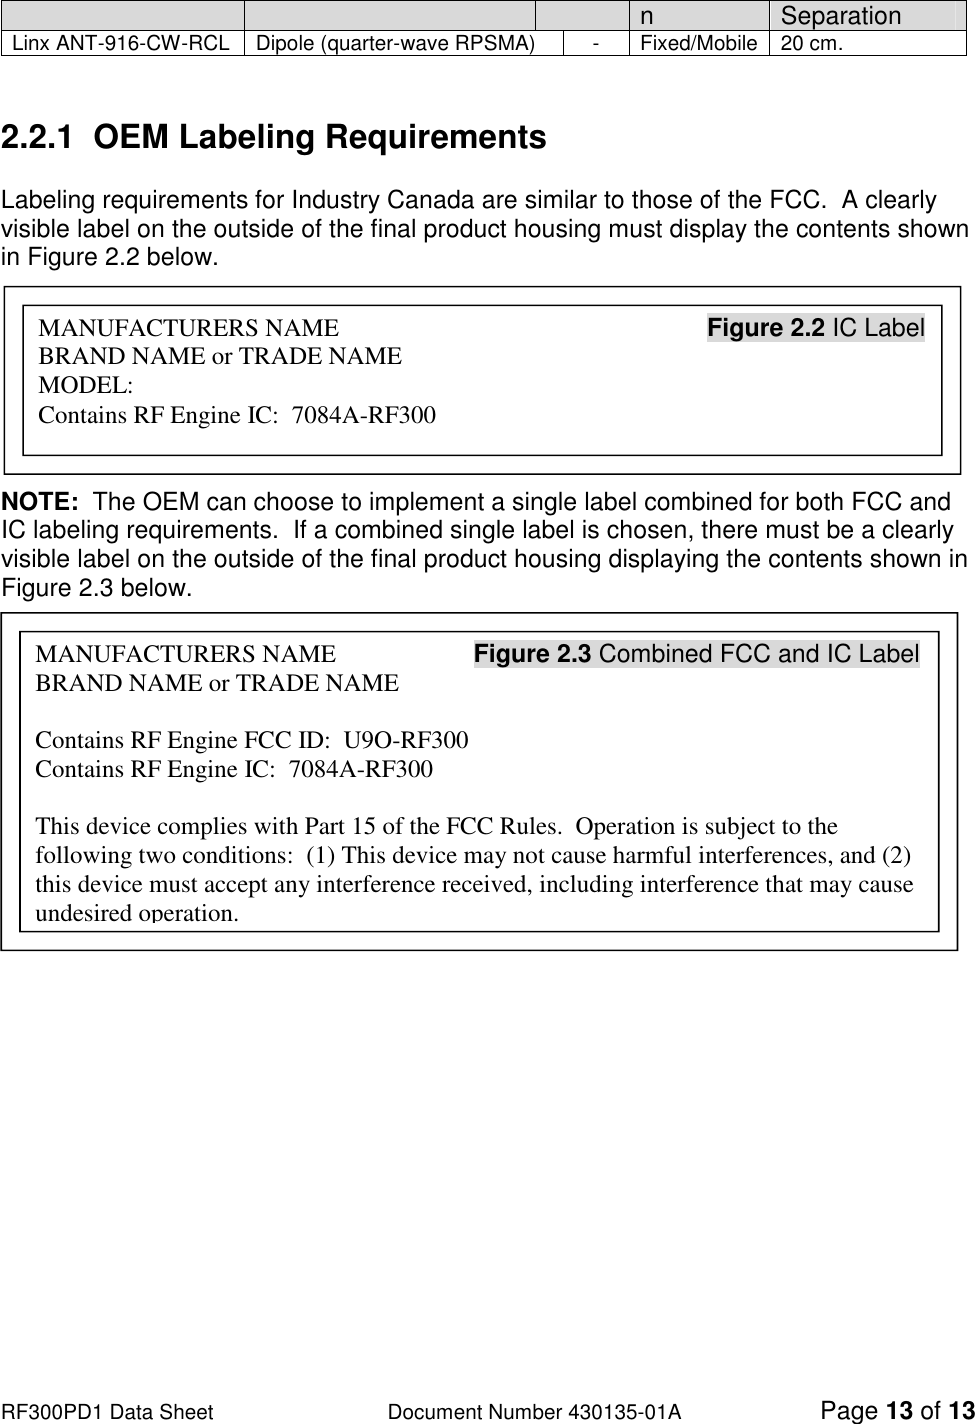                                                                                                                                                                          RF300PD1 Data Sheet                   Document Number 430135-01A Page 13 of 13 n  Separation Linx ANT-916-CW-RCL  Dipole (quarter-wave RPSMA)  -  Fixed/Mobile 20 cm.   2.2.1  OEM Labeling Requirements  Labeling requirements for Industry Canada are similar to those of the FCC.  A clearly visible label on the outside of the final product housing must display the contents shown in Figure 2.2 below.       NOTE:  The OEM can choose to implement a single label combined for both FCC and IC labeling requirements.  If a combined single label is chosen, there must be a clearly visible label on the outside of the final product housing displaying the contents shown in Figure 2.3 below.              MANUFACTURERS NAME                   Figure 2.2 IC Label BRAND NAME or TRADE NAME MODEL: Contains RF Engine IC:  7084A-RF300 MANUFACTURERS NAME                      Figure 2.3 Combined FCC and IC Label BRAND NAME or TRADE NAME  Contains RF Engine FCC ID:  U9O-RF300 Contains RF Engine IC:  7084A-RF300  This device complies with Part 15 of the FCC Rules.  Operation is subject to the following two conditions:  (1) This device may not cause harmful interferences, and (2) this device must accept any interference received, including interference that may cause undesired operation. 